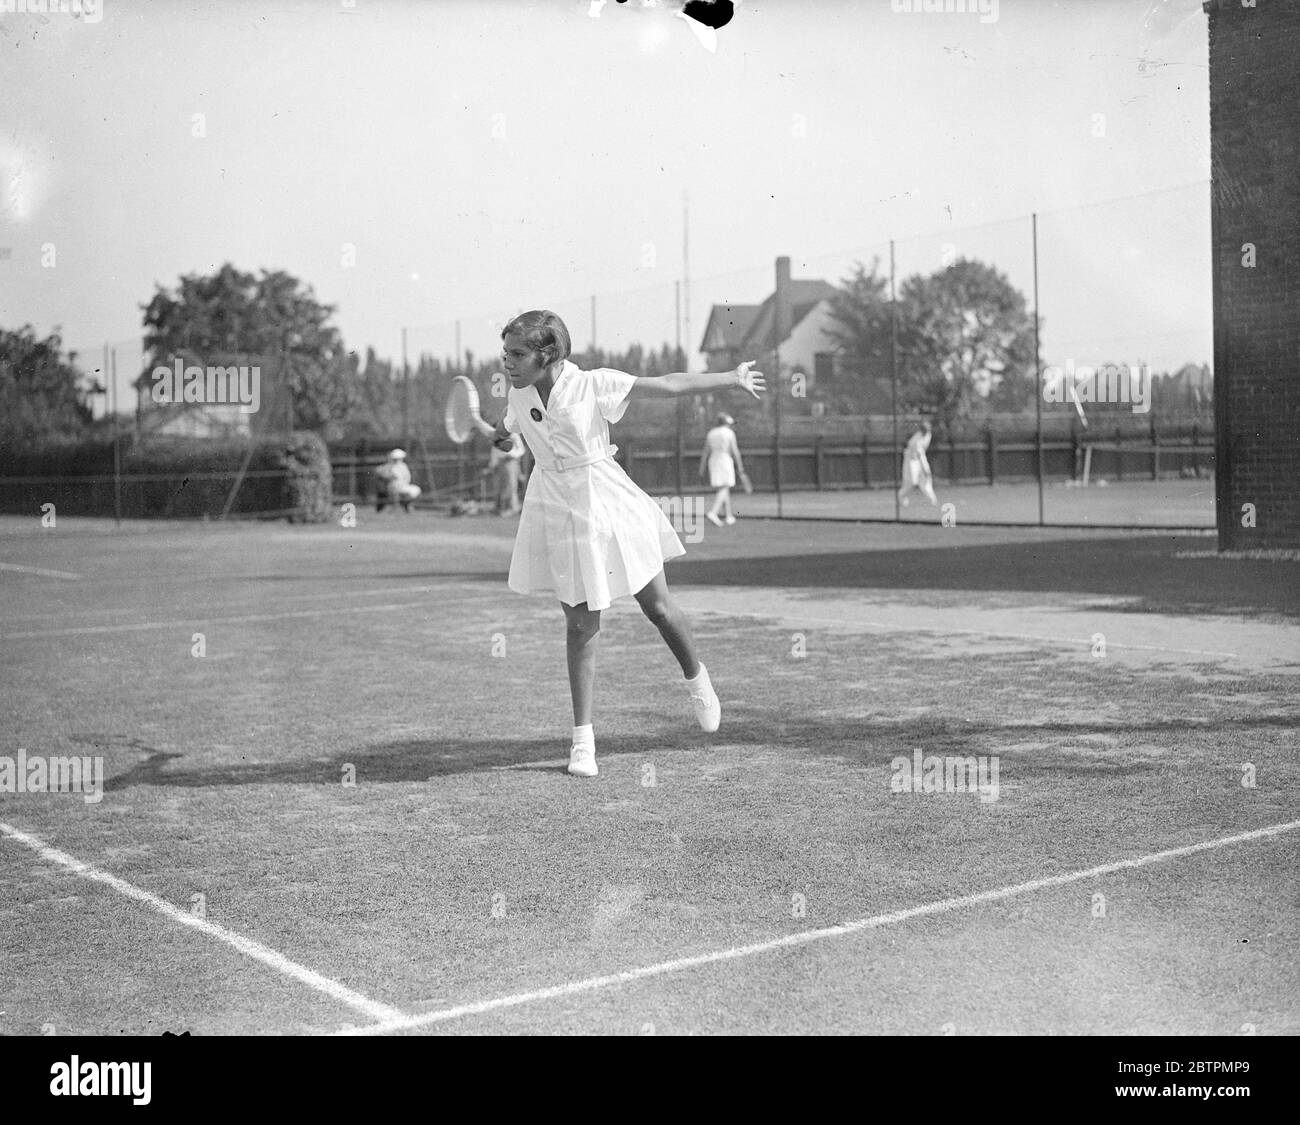 Determination . Twelve year old girl wins in Essex junior tennis tournament . The Essex Junior tennis Championships opened at Westcliff on Sea . Photo shows , Miss E A Brey , aged 12 , in play against Miss M J Belcham , whom she beat . 24 August 1936 Original caption from negative Stock Photo